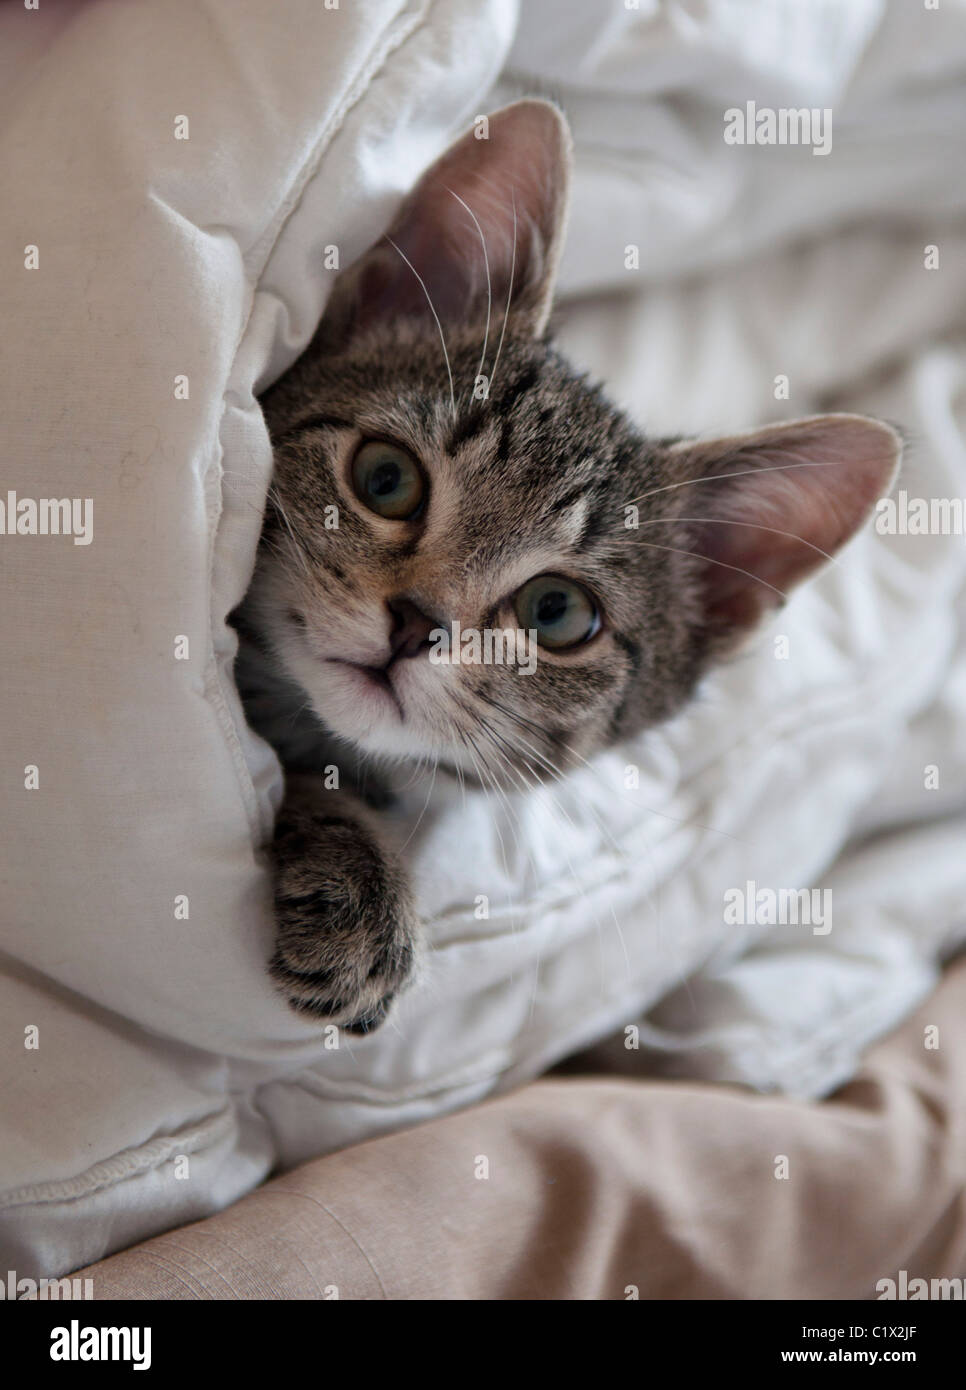 A young 2 month kitten peeking out from a duvet Stock Photo